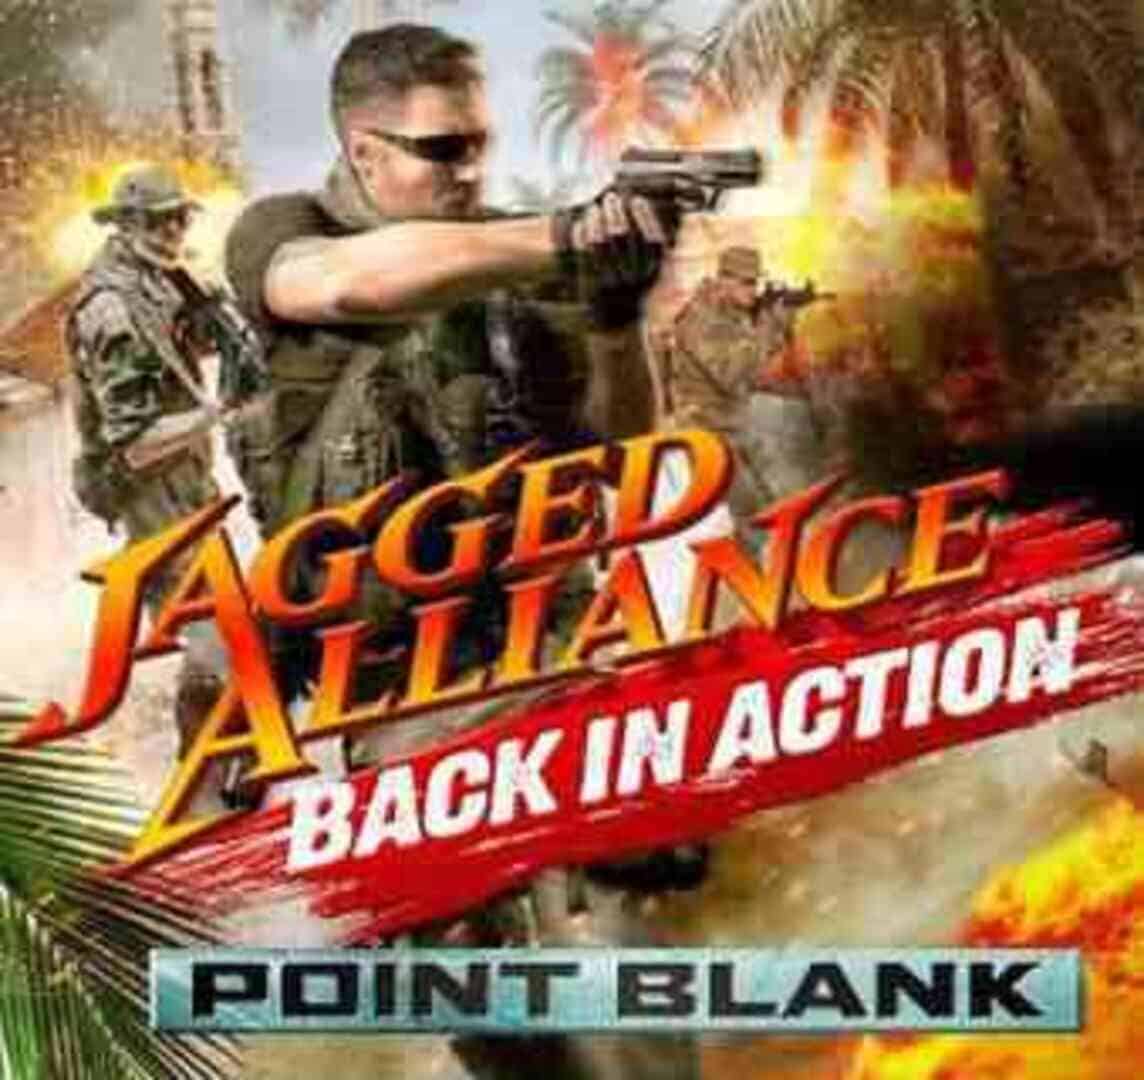 Jagged Alliance: Back In Action - Point Blank